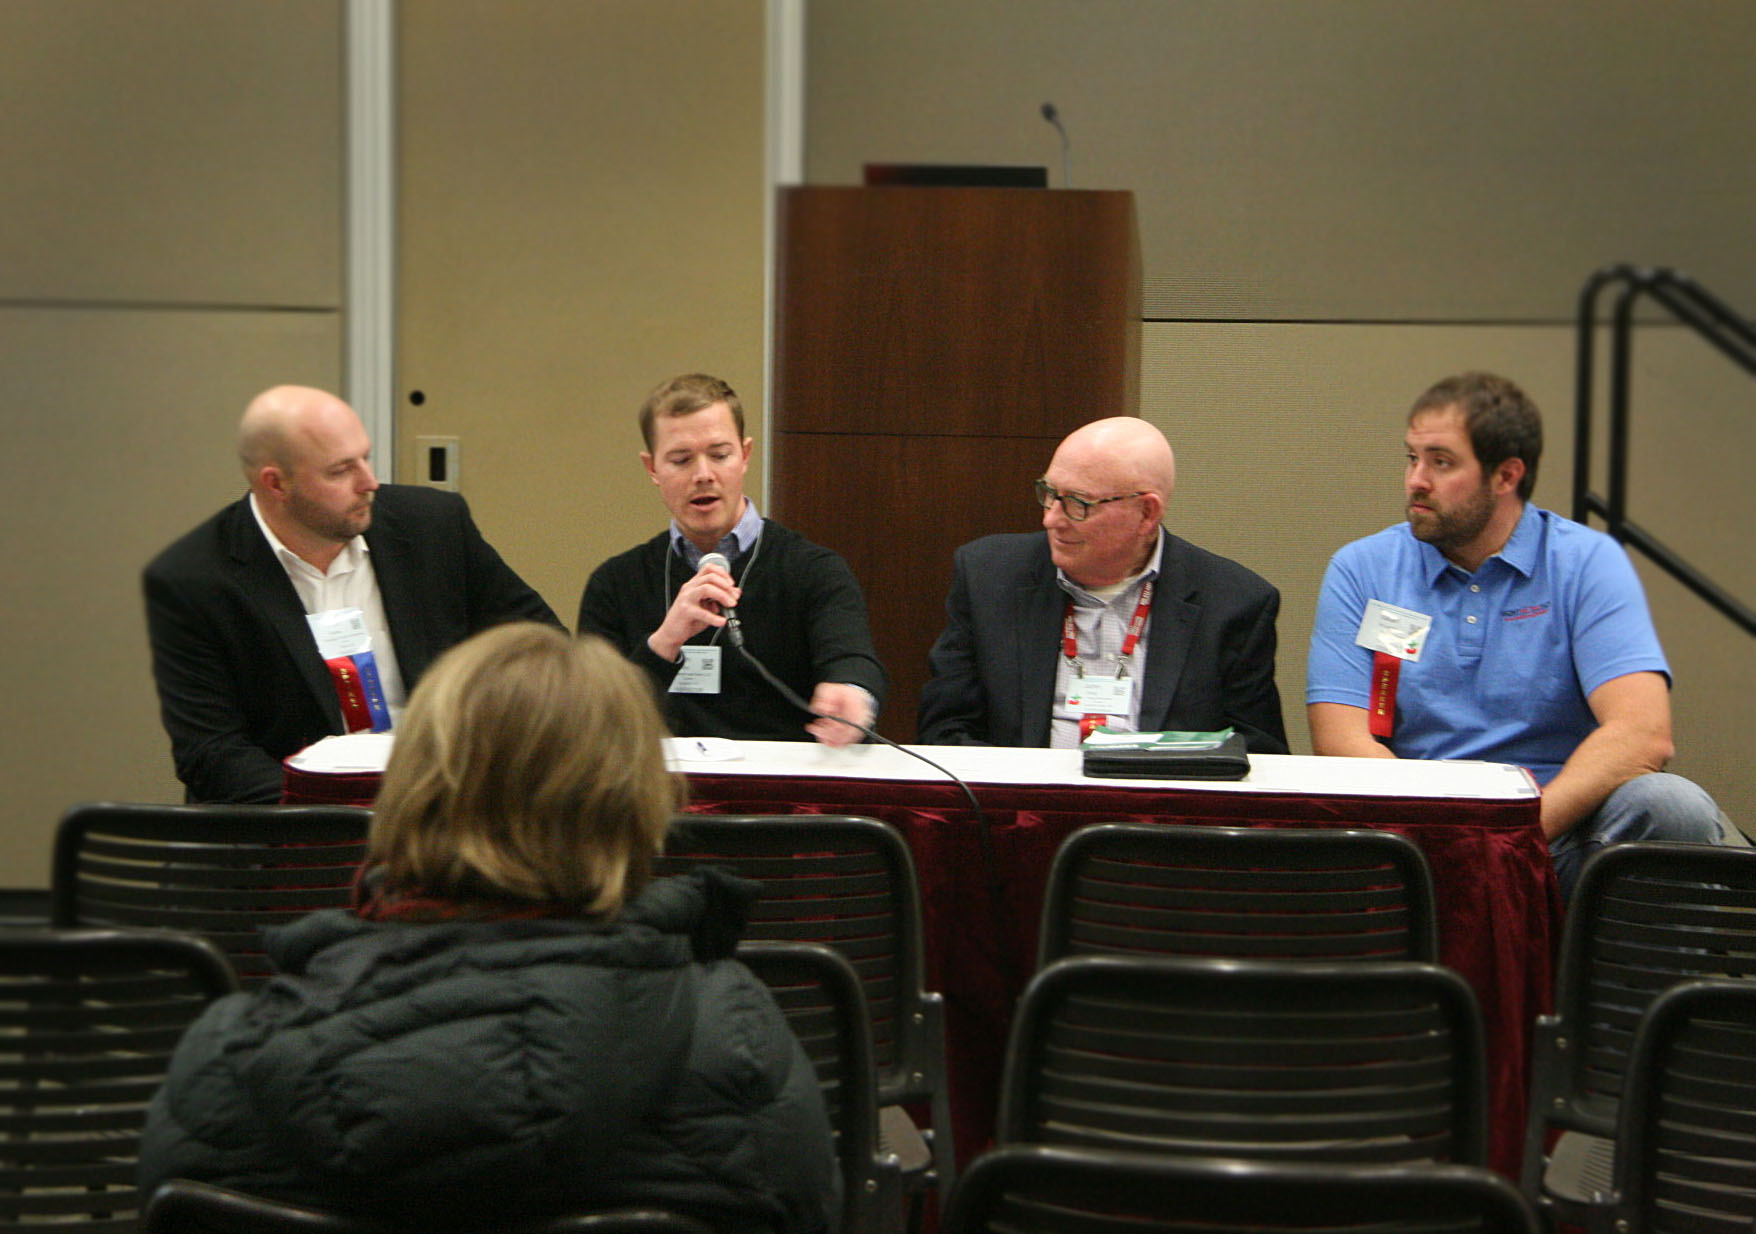 Michigan consumers want local sweet cherries, so there is good money to be made in fresh production if Michigan growers can deliver top quality, said growers on a sweet cherry panel, including, from left to right, Justin Finkler of Riverridge Produce; Adam Dietrich of Leo Dietrich and Sons; John King, of King Orchards; and Isaiah Wunsch, of Isaiah Wunsch Farm. <b>(Kate Prengaman/Good Fruit Grower)</b>